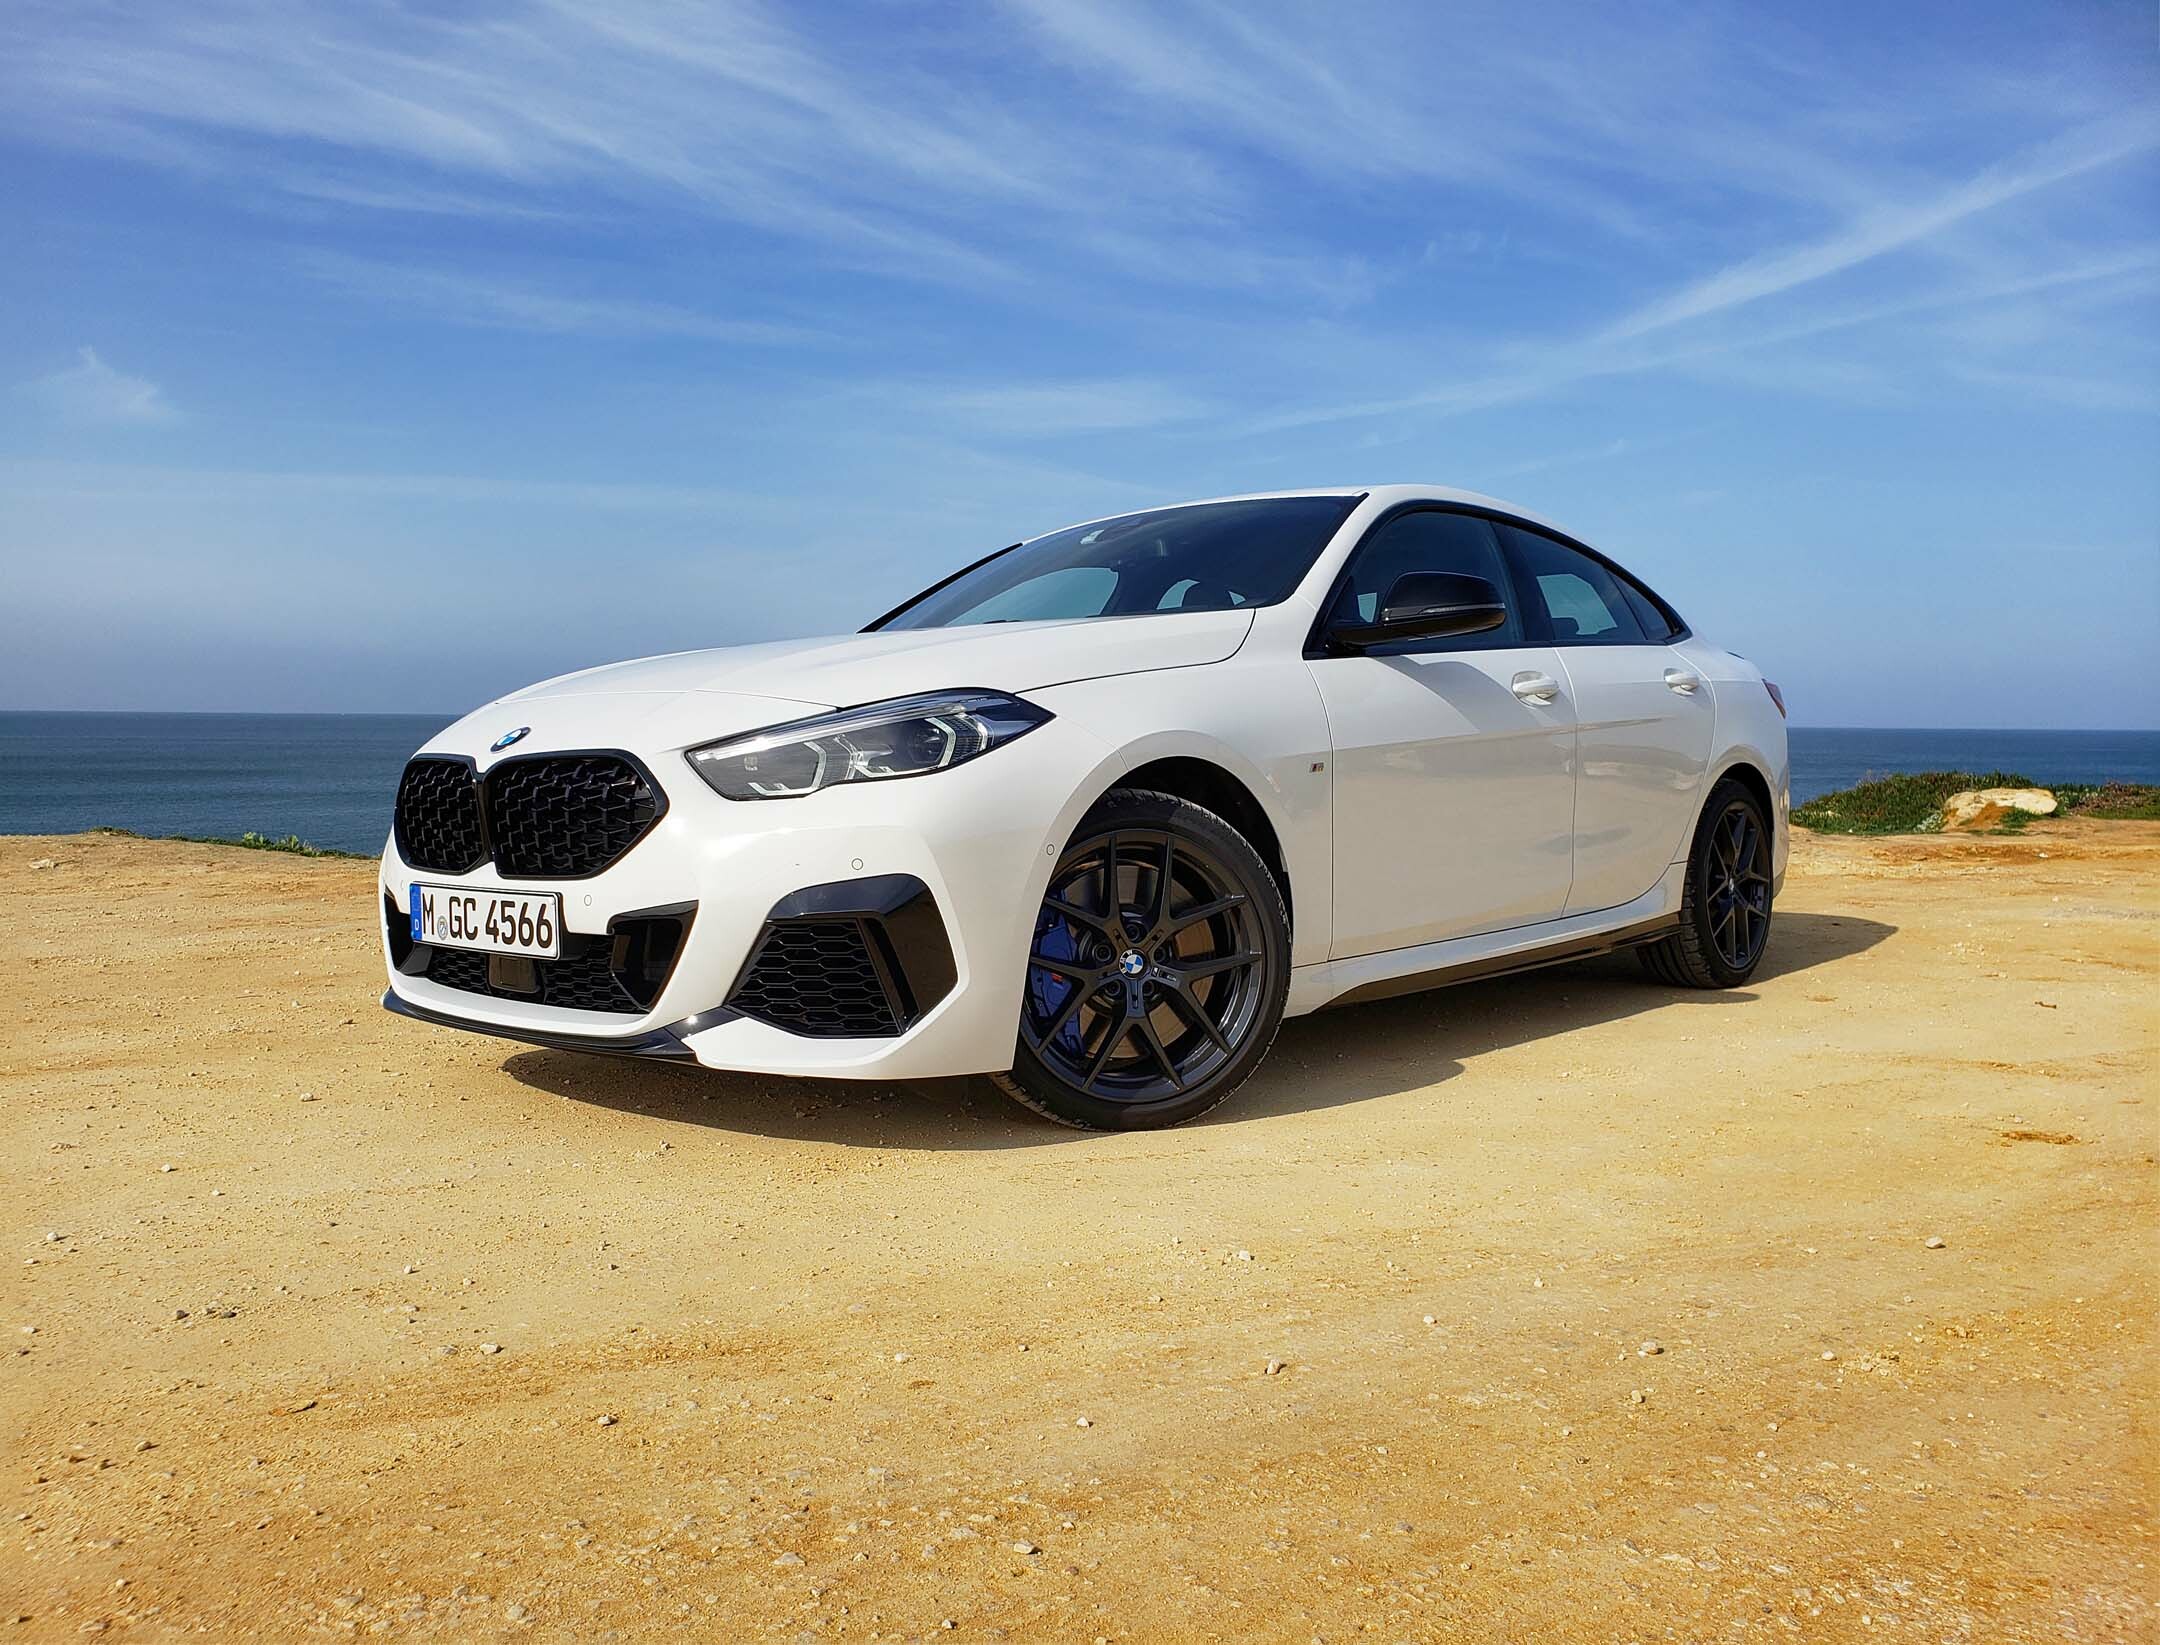 BMW 2 Series: Gran Coupe, Alloy wheels available up to 19" in size, The distinctive kidney grille. 2160x1650 HD Wallpaper.